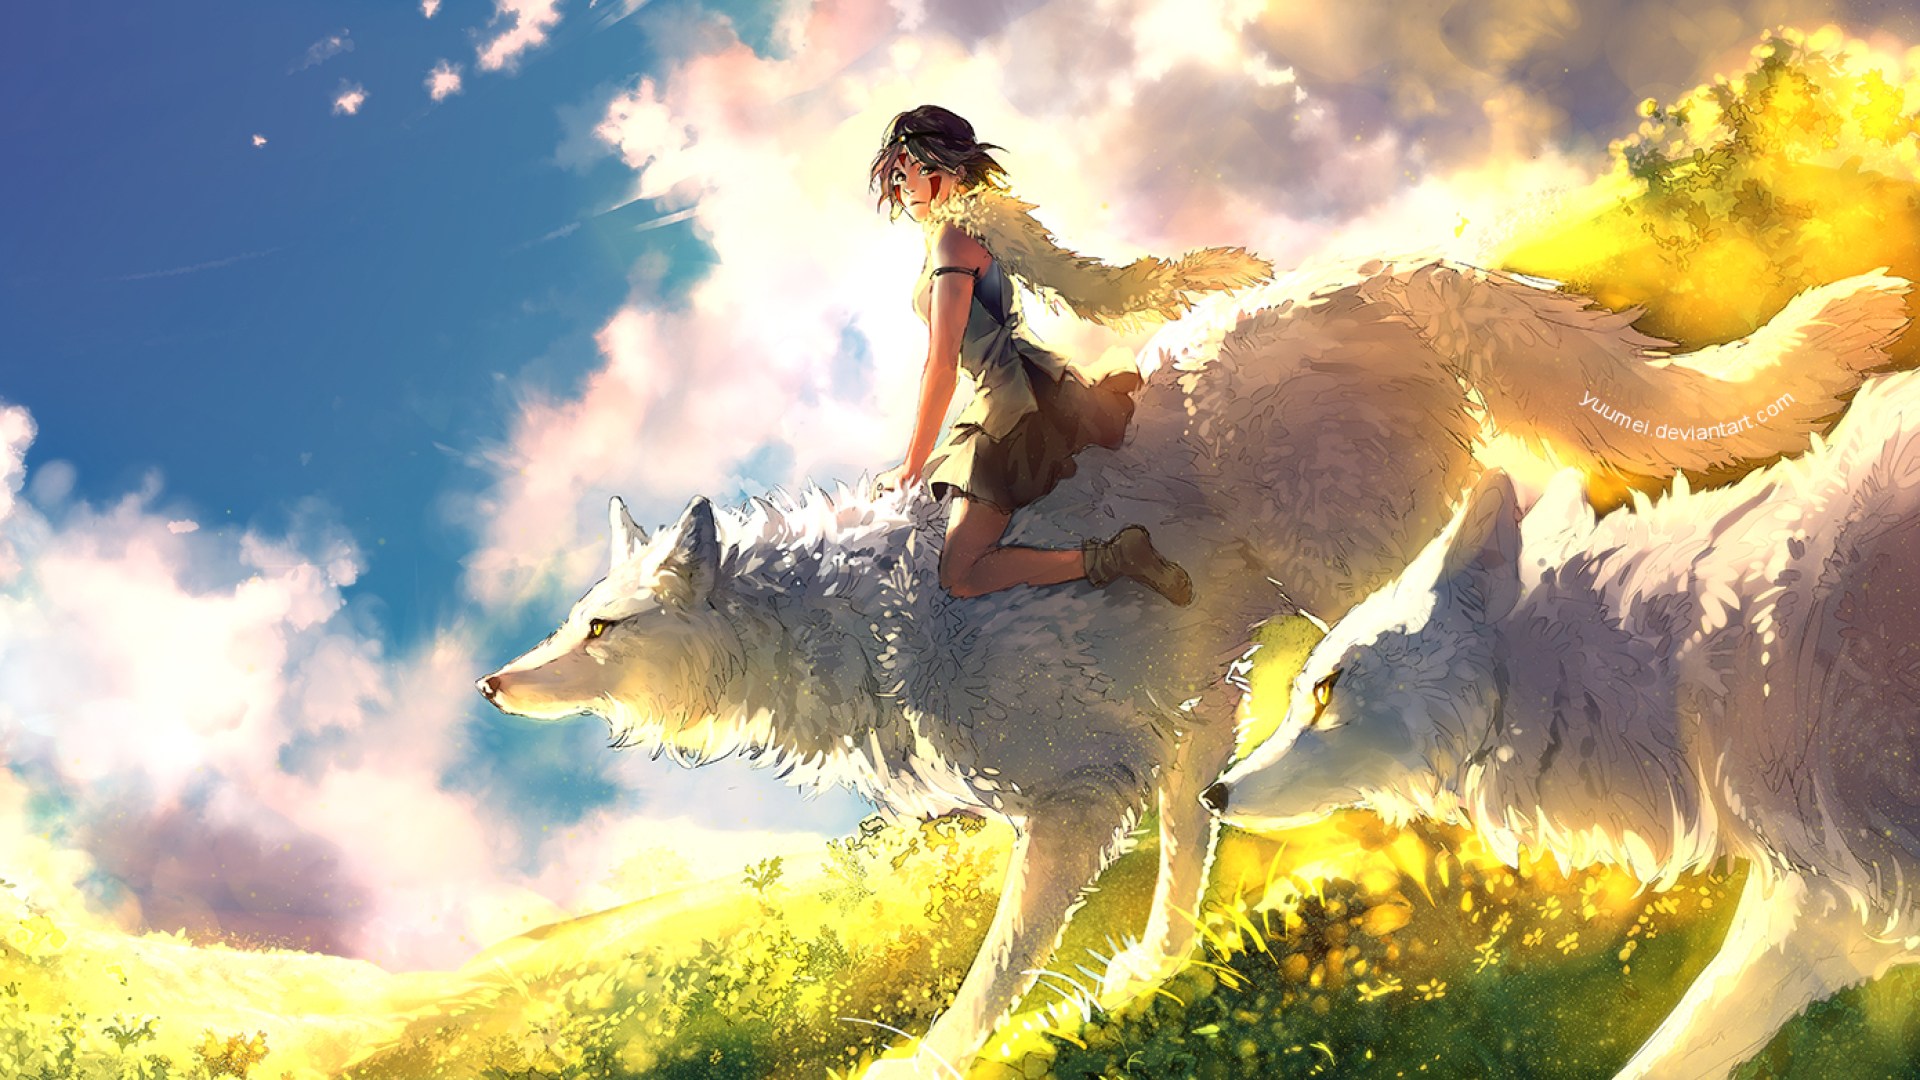 Anime Wolf And Girl - 1920x1080 Wallpaper 